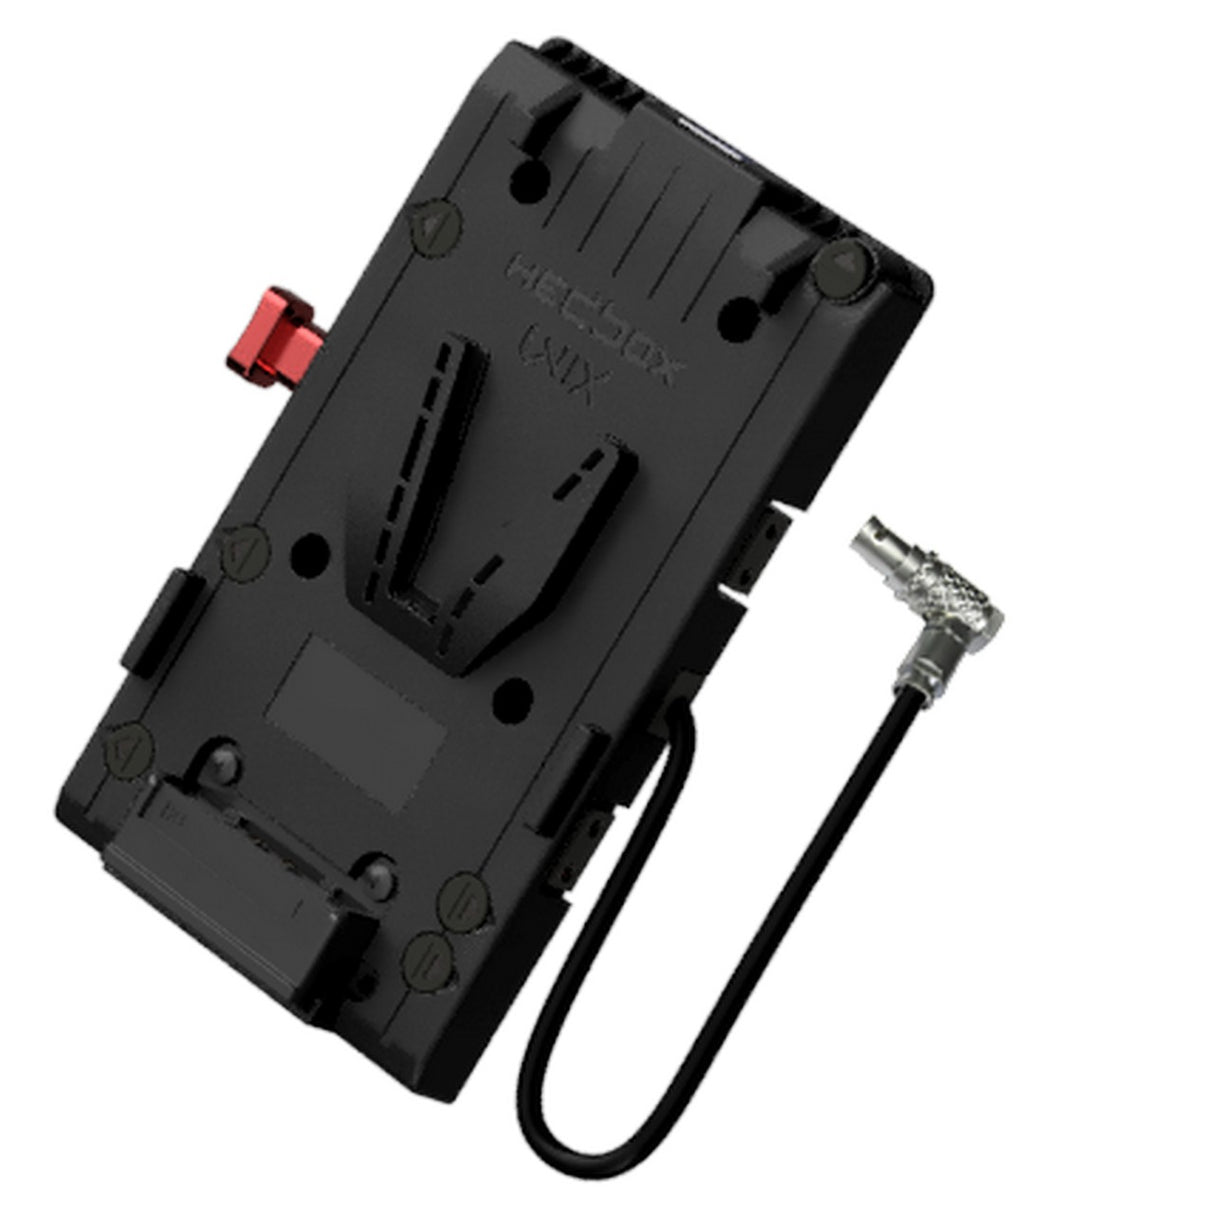 HEDBOX UNIX-0BL | V-Lock Mount Adapter Battery Power Plate with 2-Pin Push Pull FGG.0B.302 Male Right Angle Connector